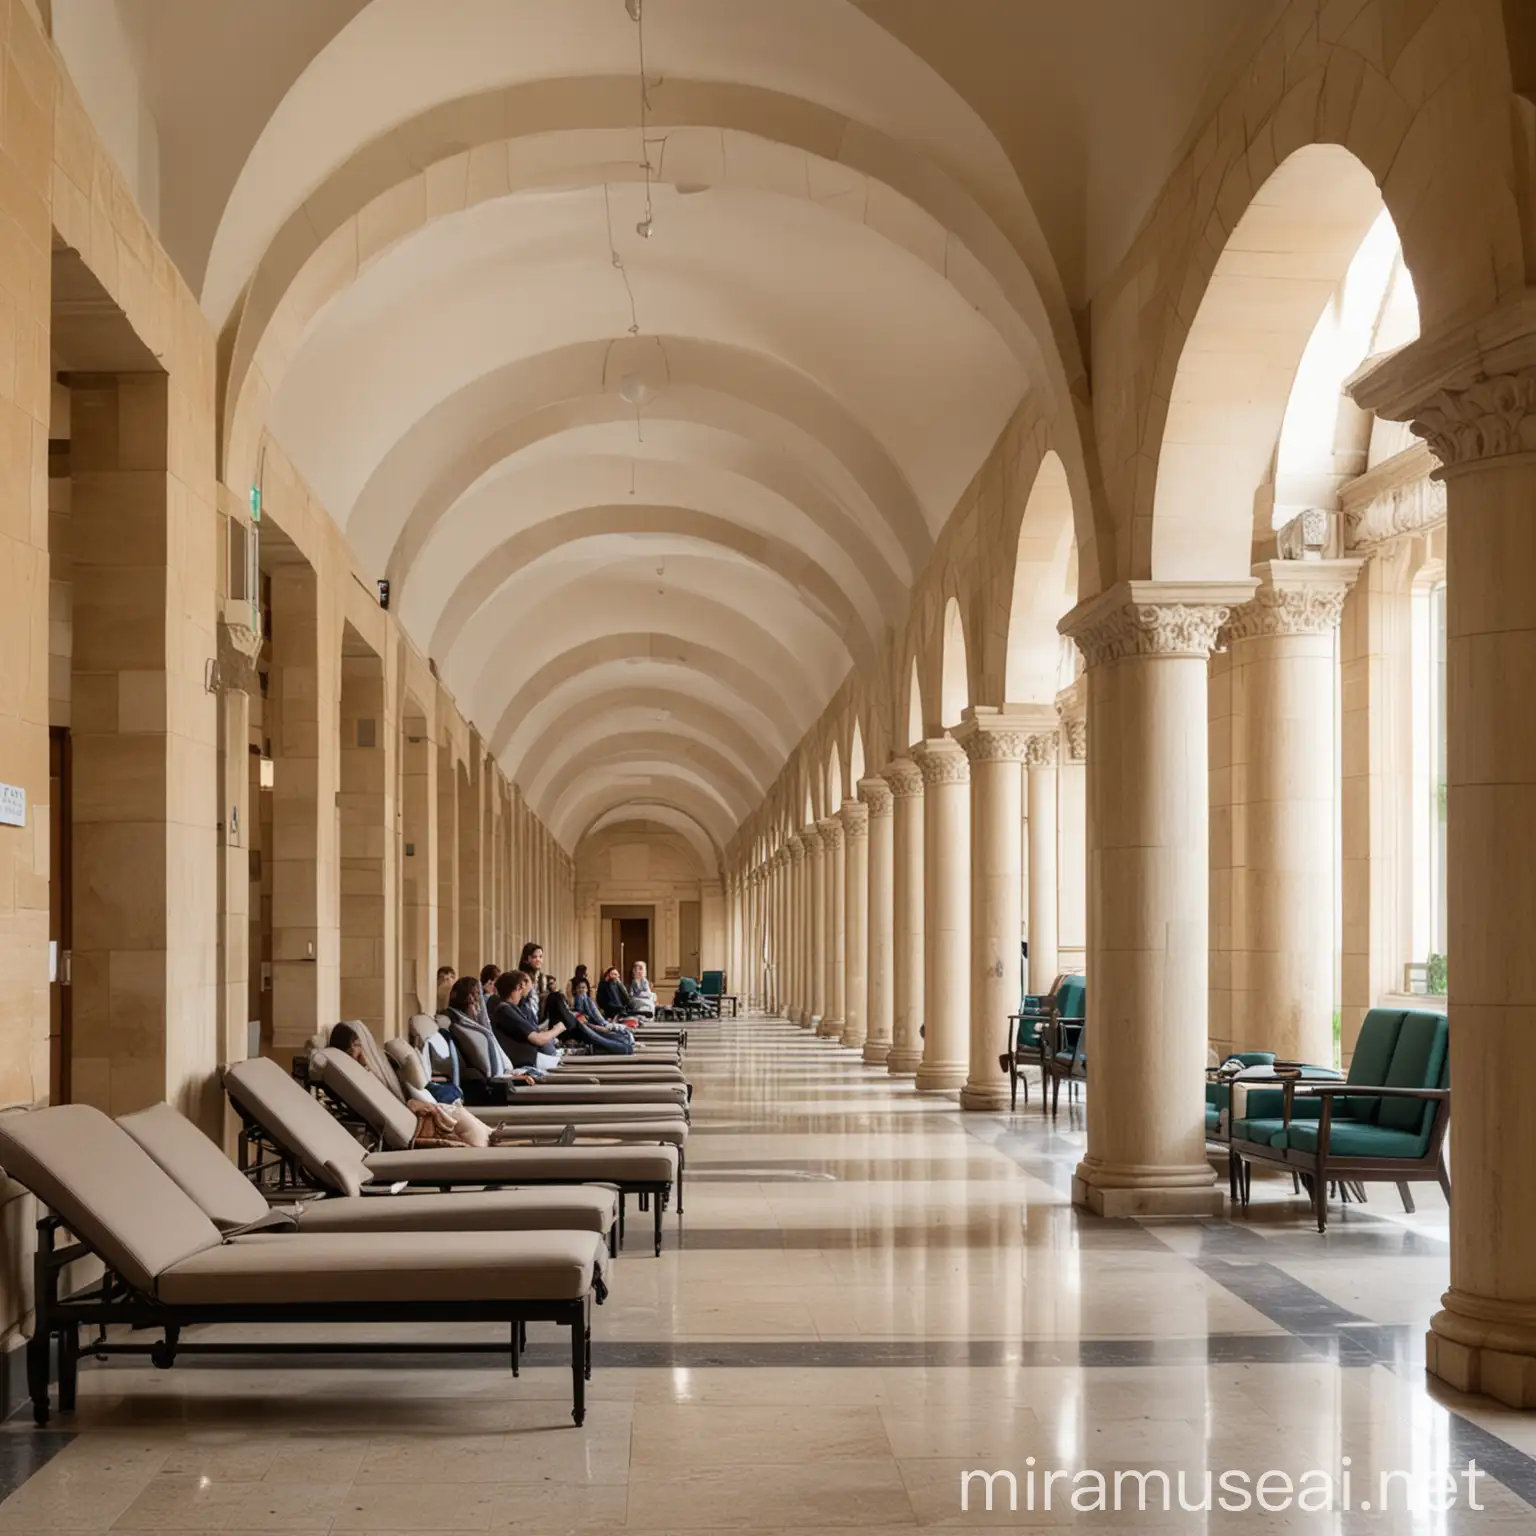  chaise longues that allow students to relax between lecture and study with group students, lobby with colonnade inside